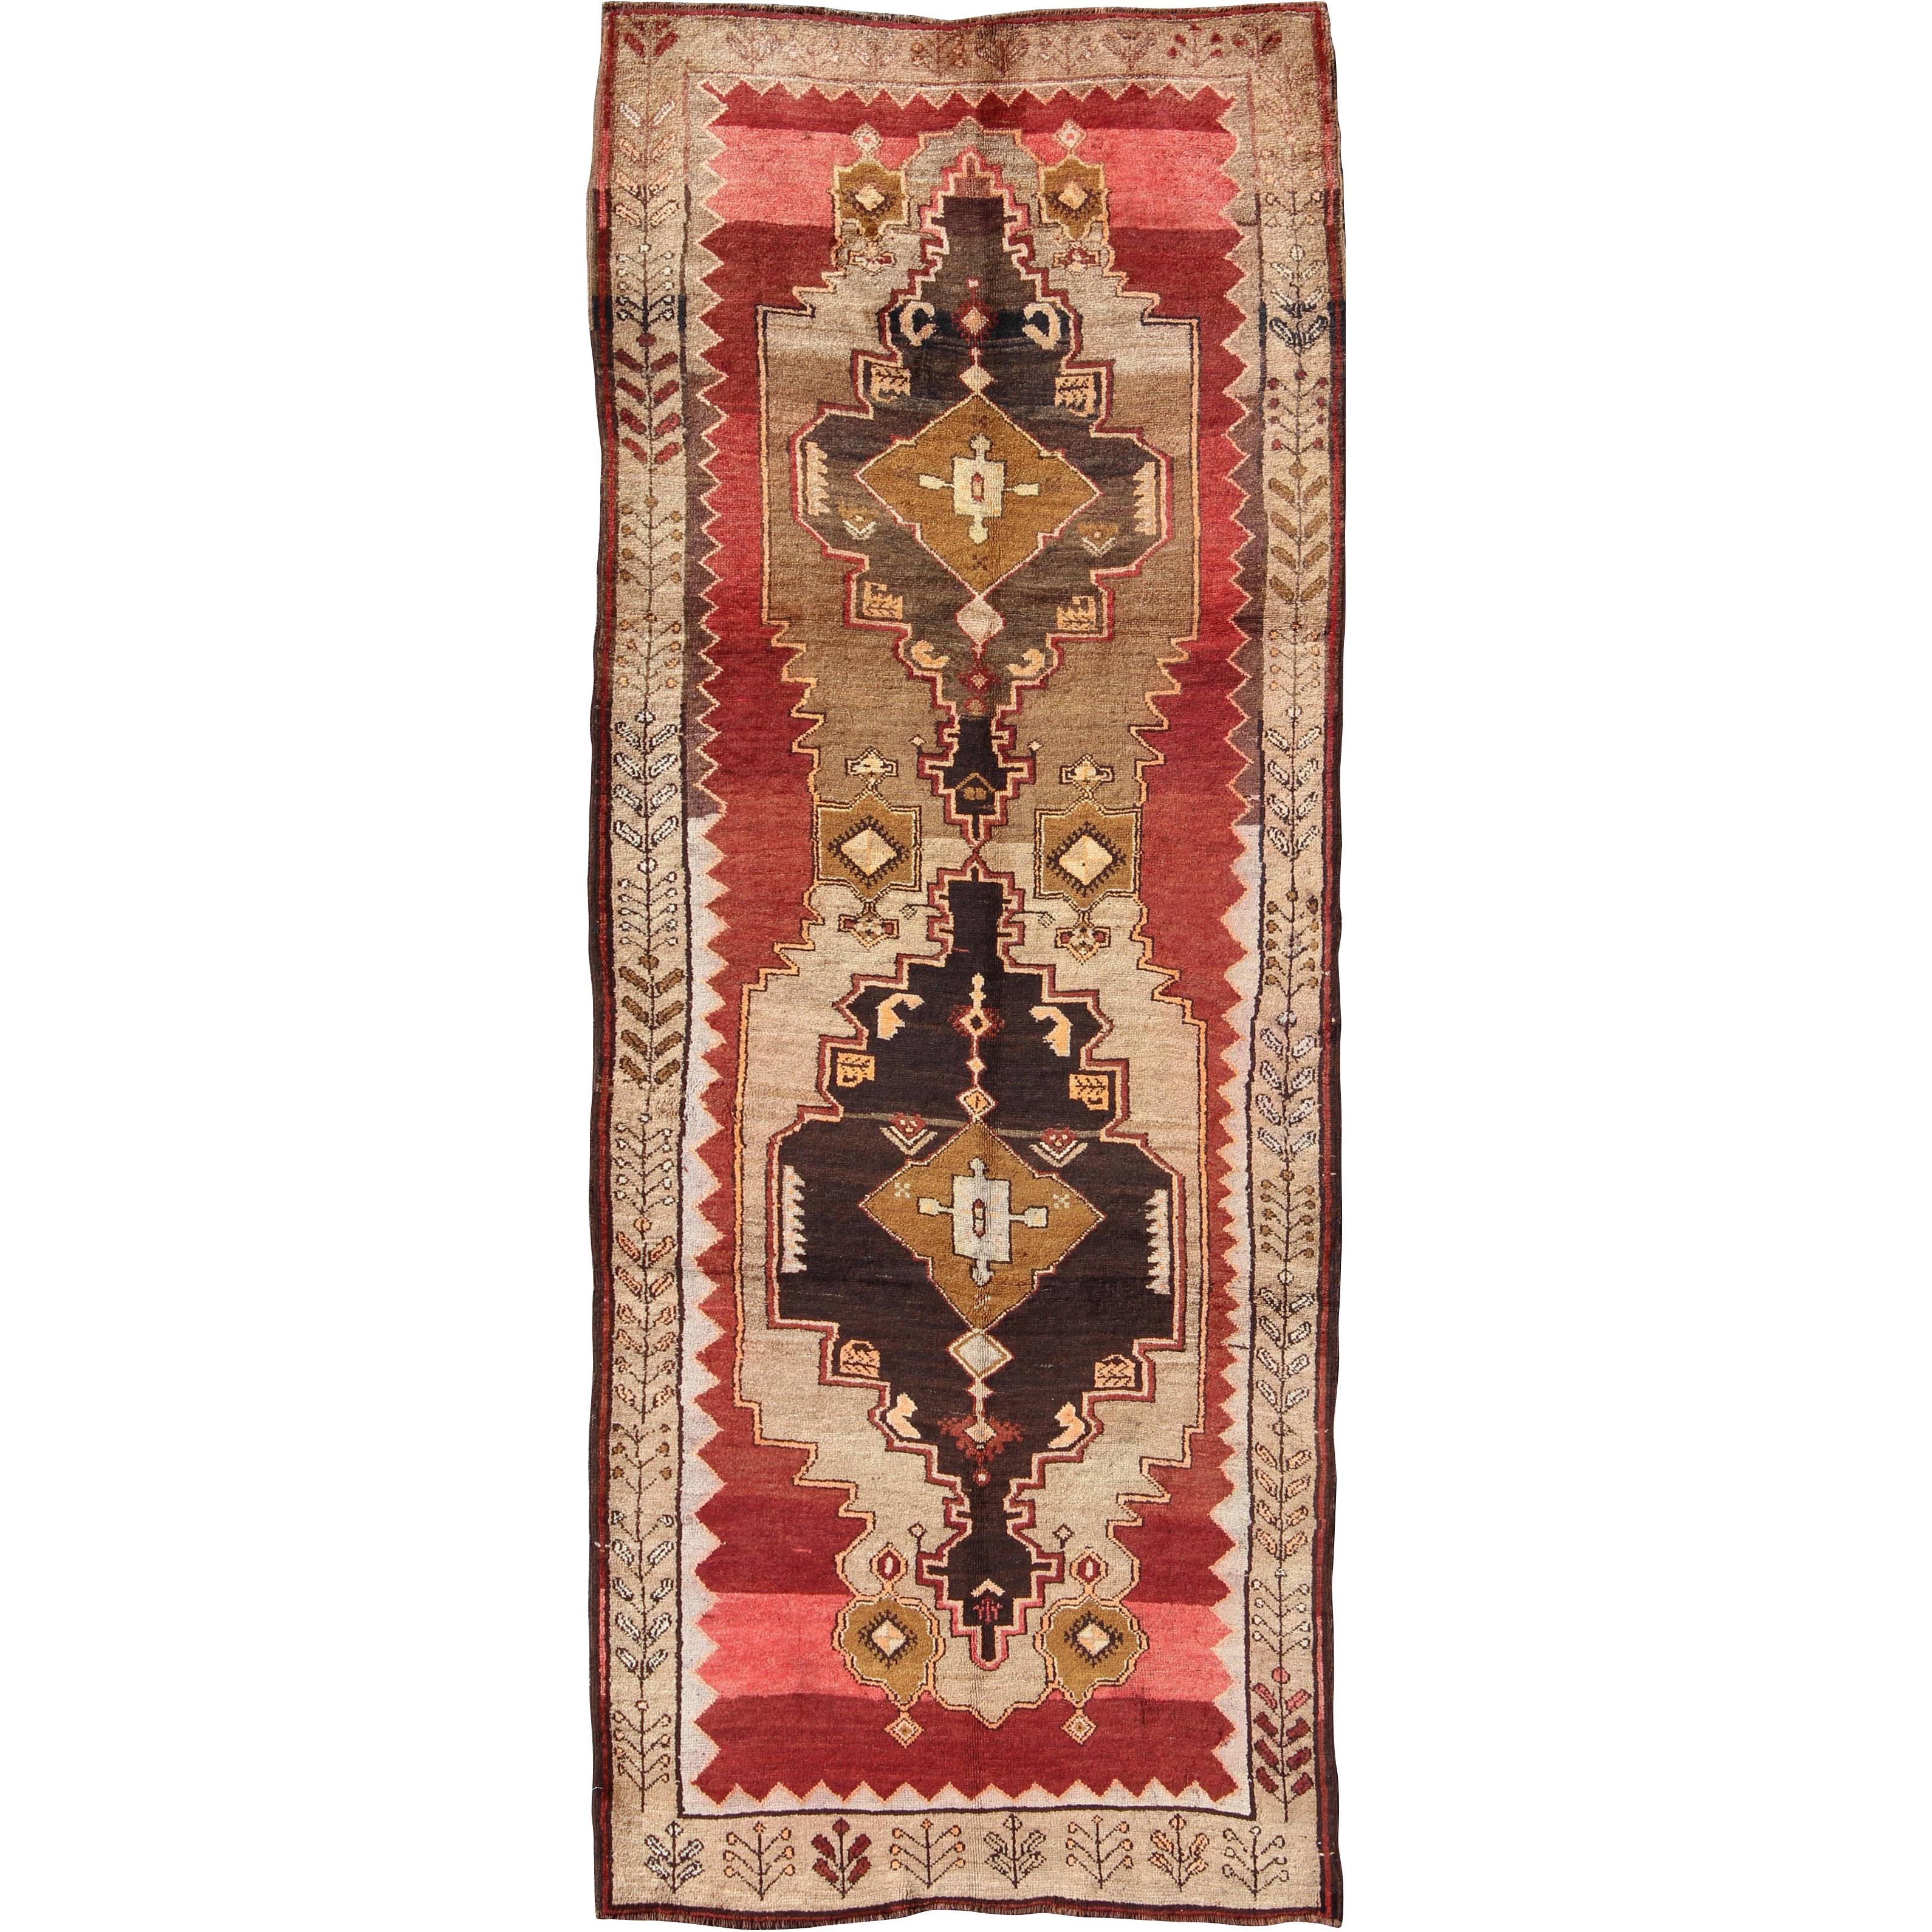 Tribal Turkish Rug from Turkey with Colorful Dual Central Medallion Design